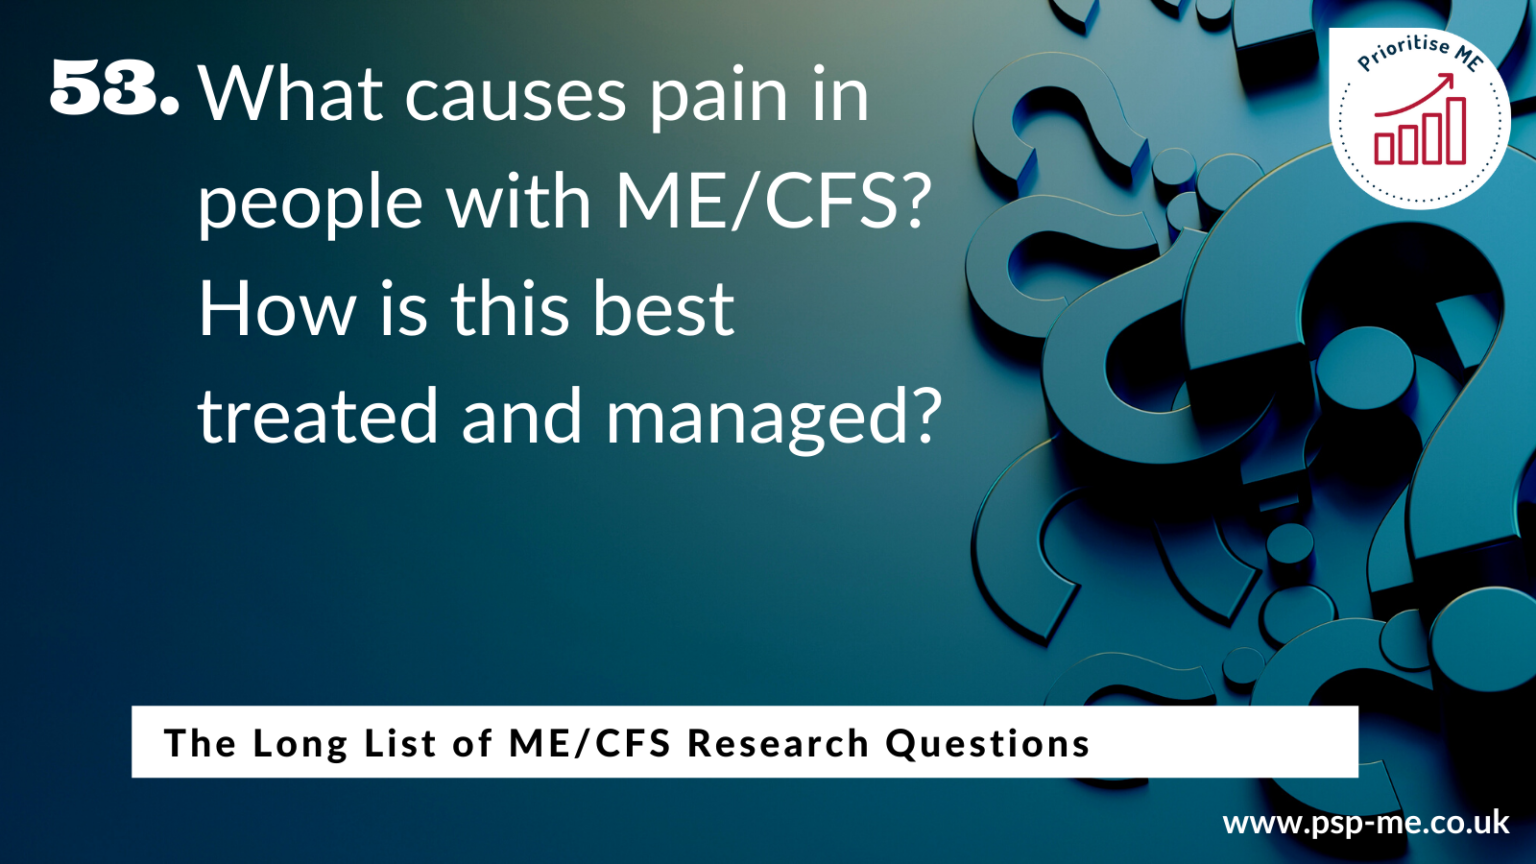 The Long List of ME_CFS Research Questions (53)